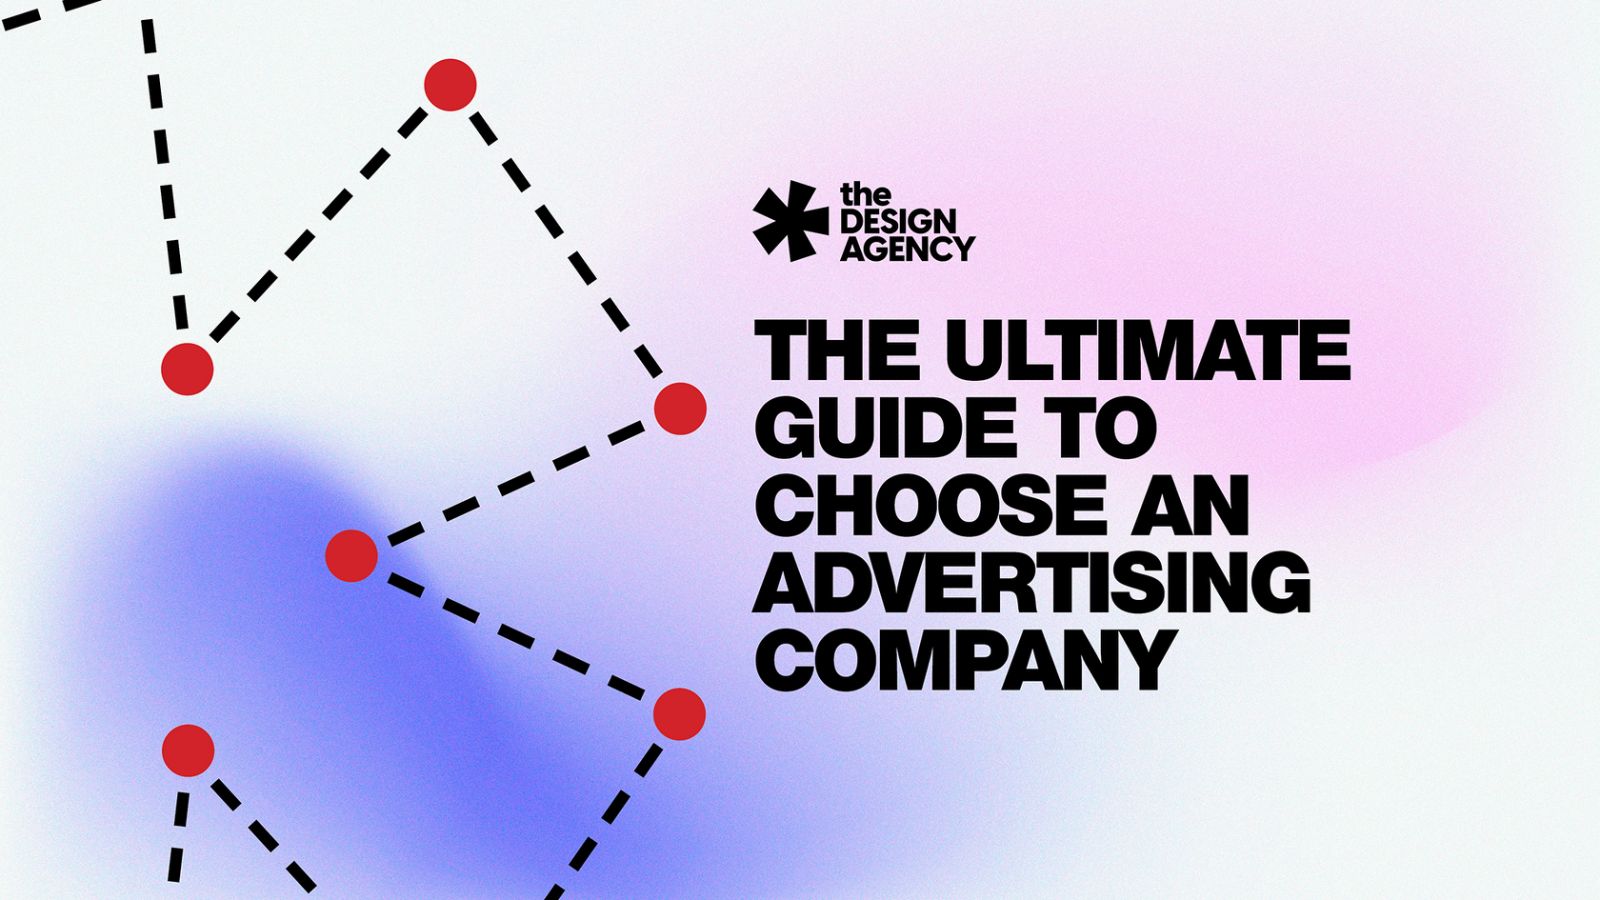 The Ultimate Guide to Choos an Advertising Company for Your Business Growth